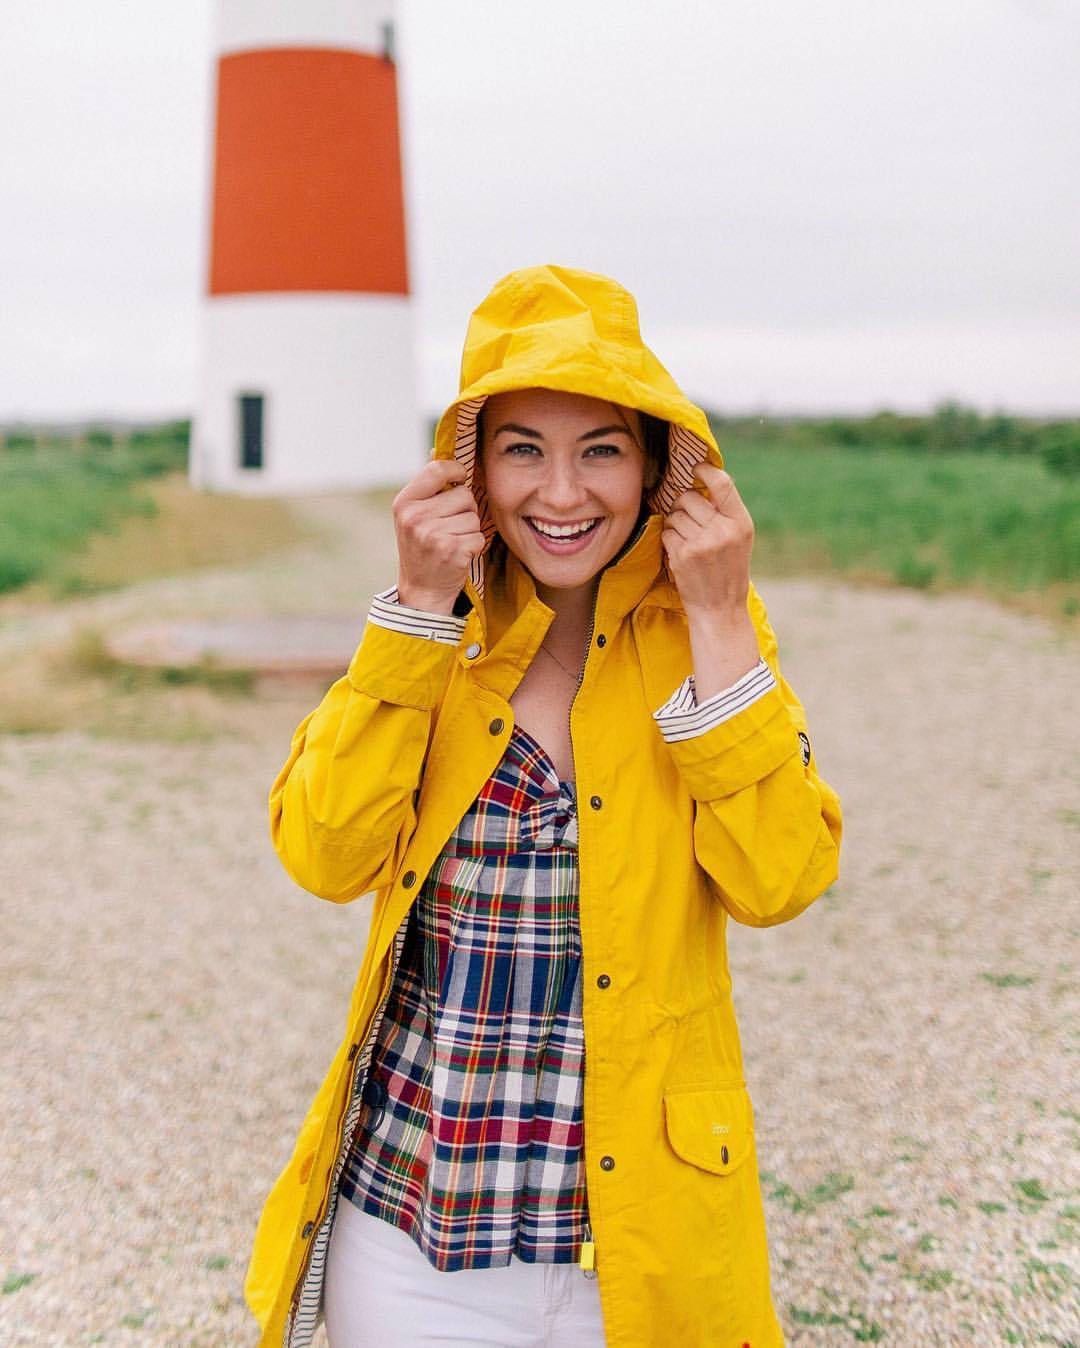 thecollegeprepster:
“don’t rain on my parade! 💛 new post on thecollegeprepster.com http://liketk.it/2siAv #liketkit #ltkunder50 @liketoknow.it 📸 by @carterfish (at Sankaty Head Light)
”